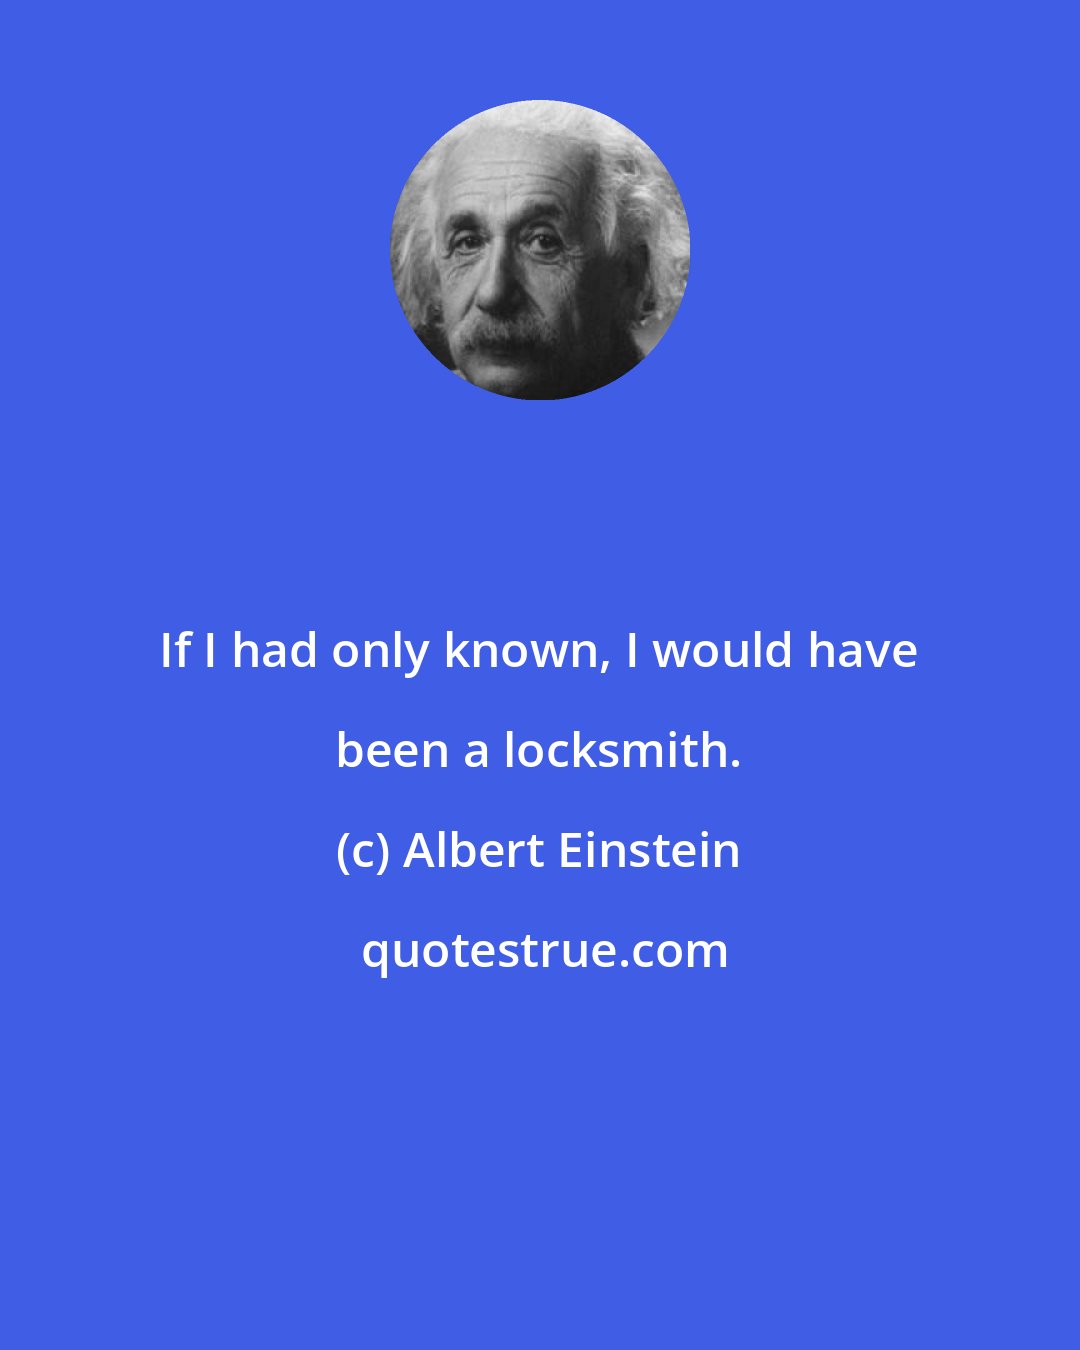 Albert Einstein: If I had only known, I would have been a locksmith.